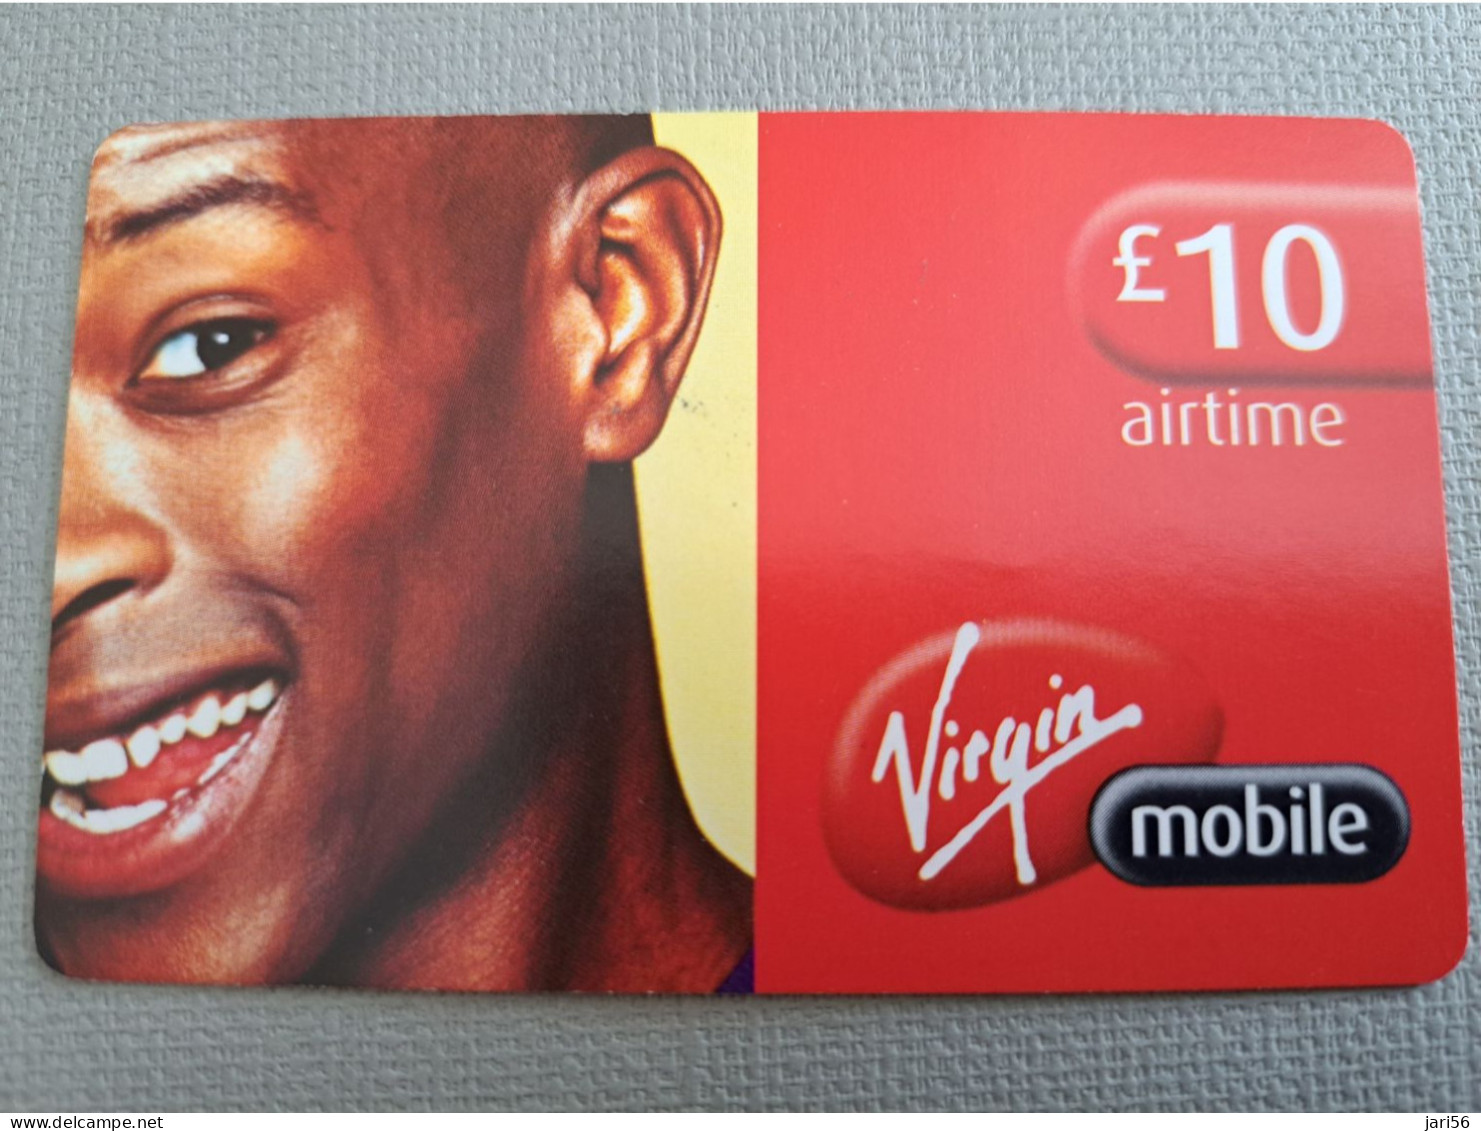 GREAT BRITAIN / 10 POUND  /PREPAID / VIRGIN MOBILE //FACE  PEOPLE ON CARD / FINE USED    **15066** - Collezioni